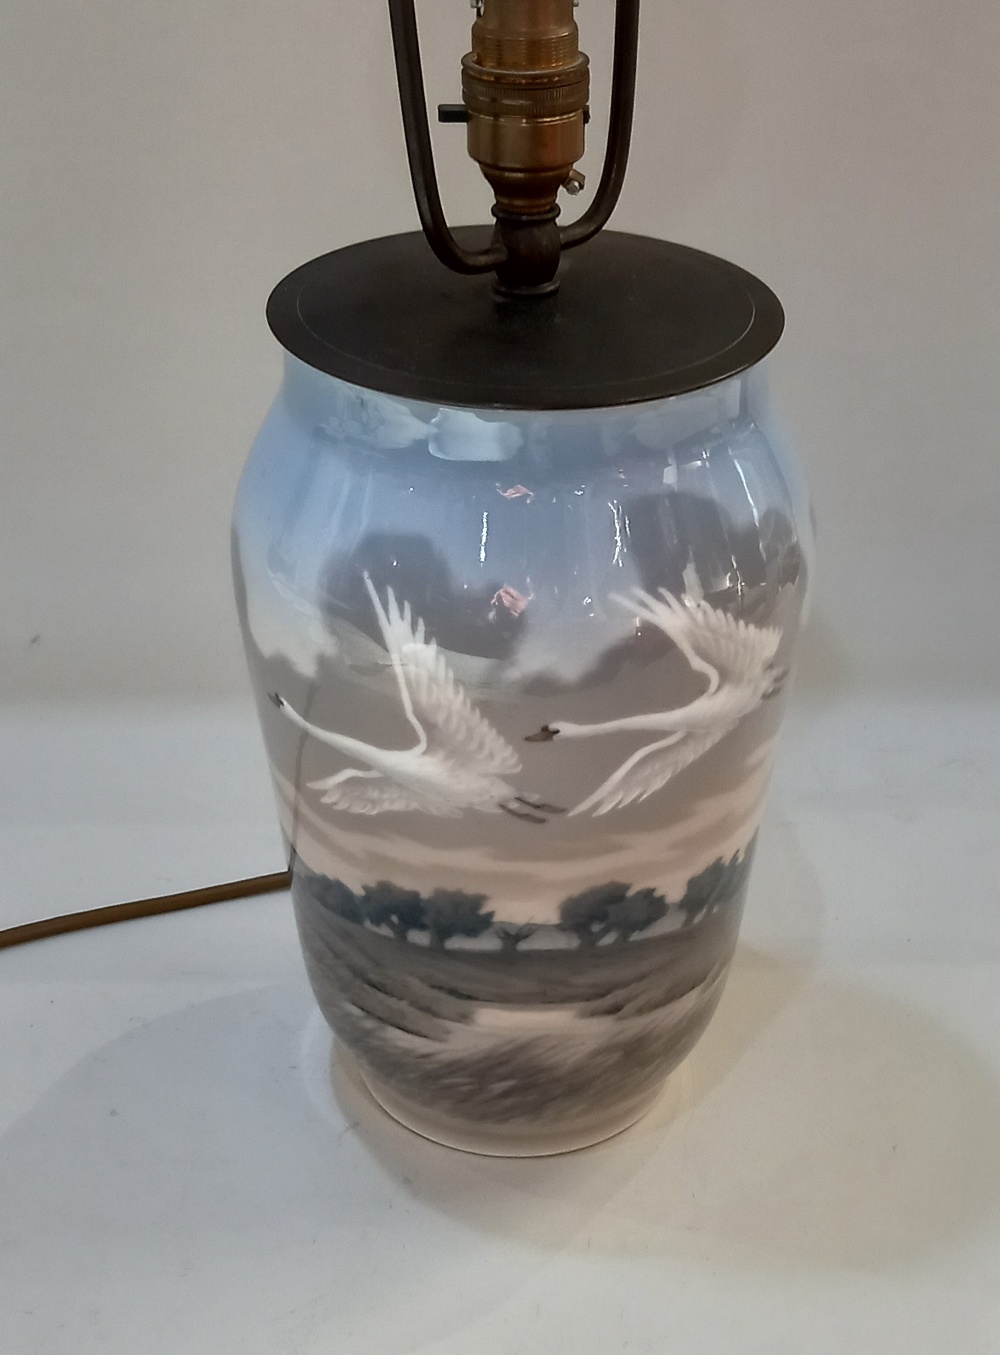 A Royal Copenhagen porcelain table lamp decorated with flying swans, 25.5cm high